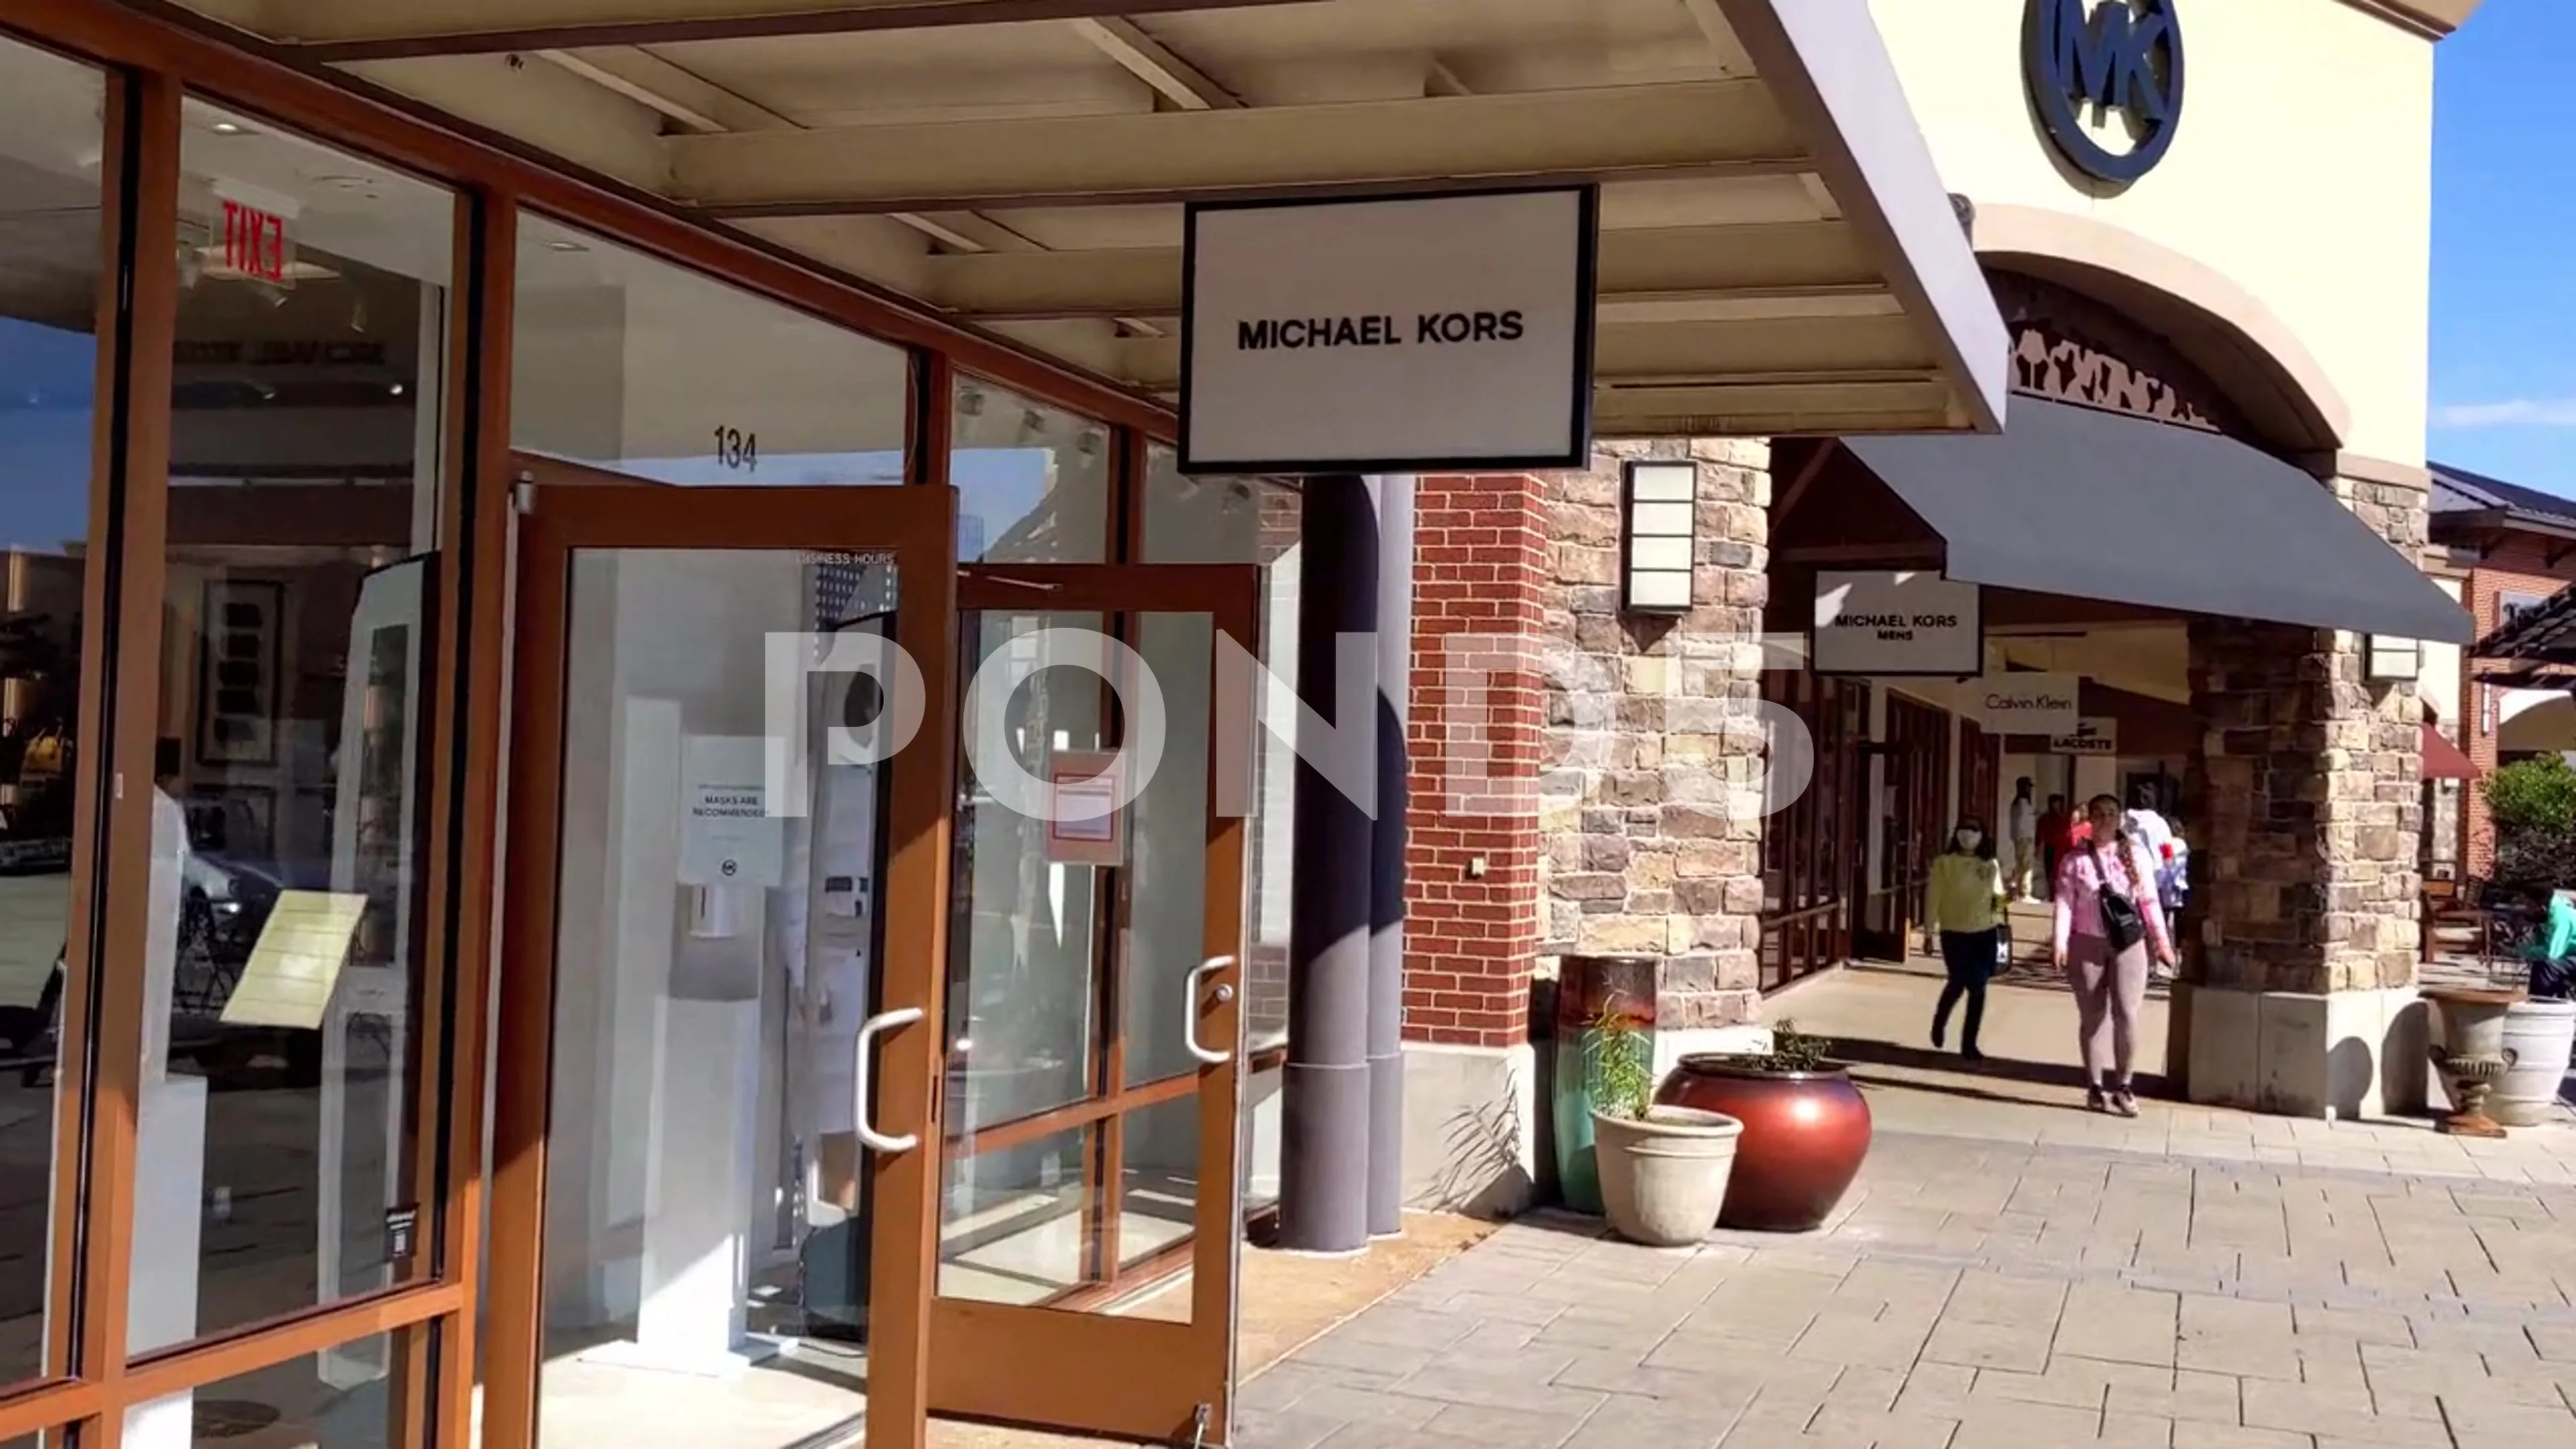 Premium Outlet Stock Footage ~ Royalty Free Stock Videos | Pond5